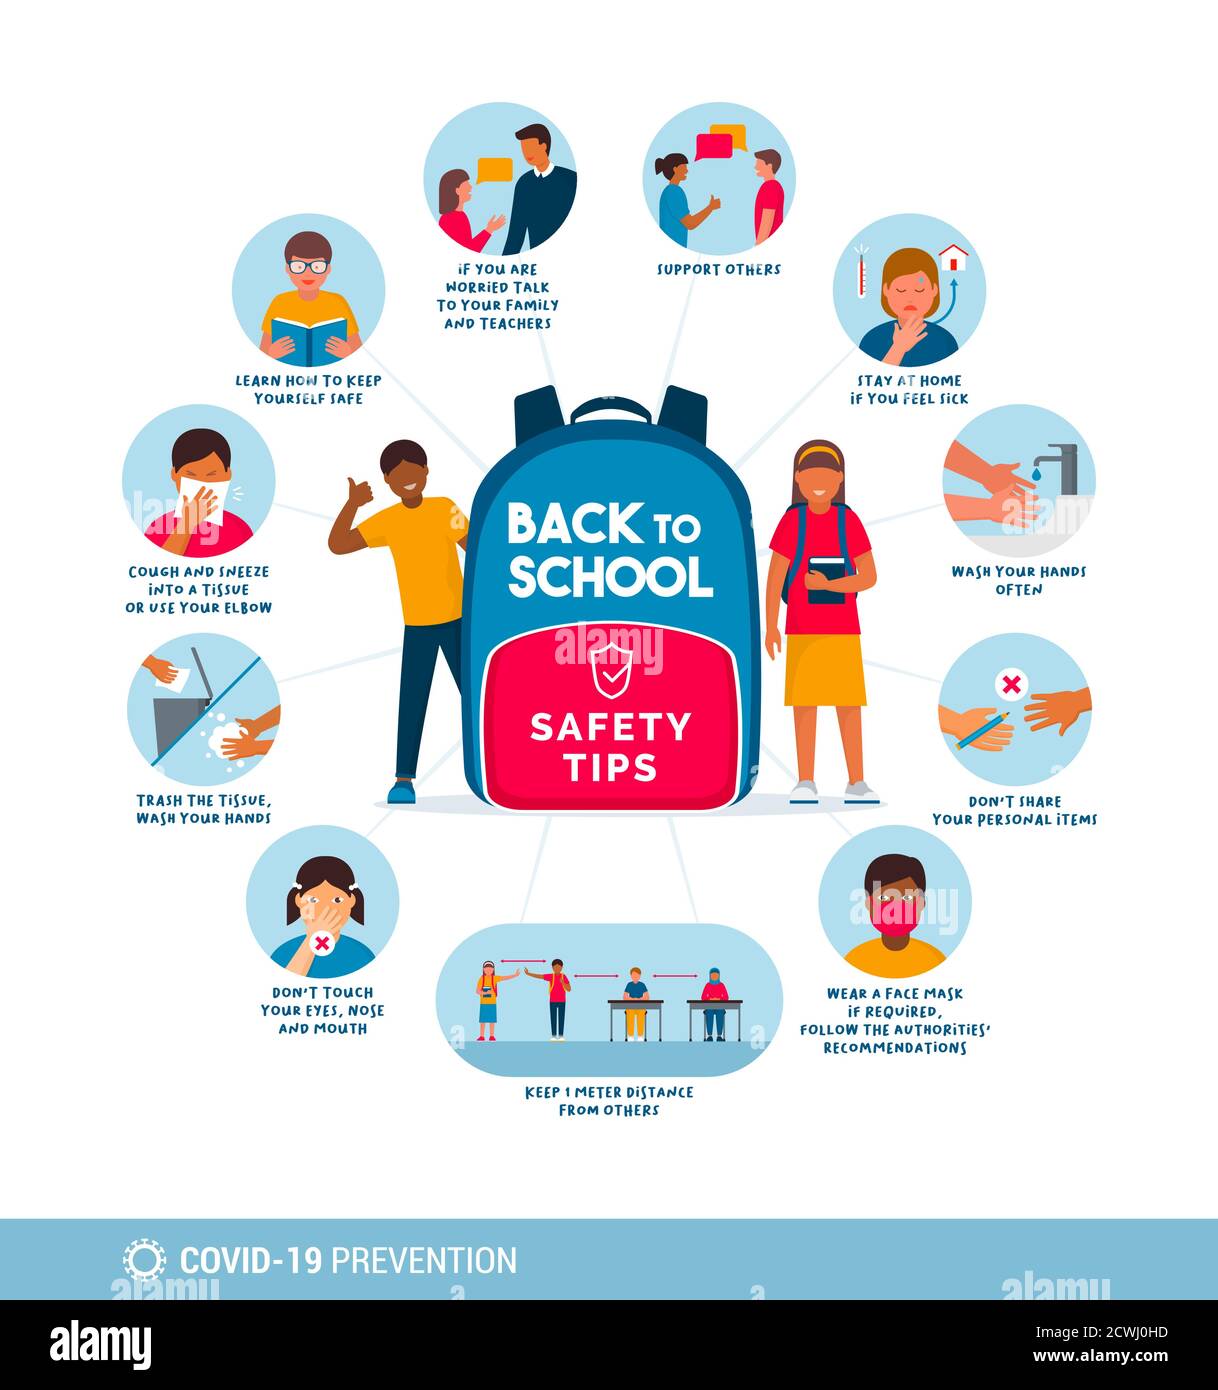 school safety poster